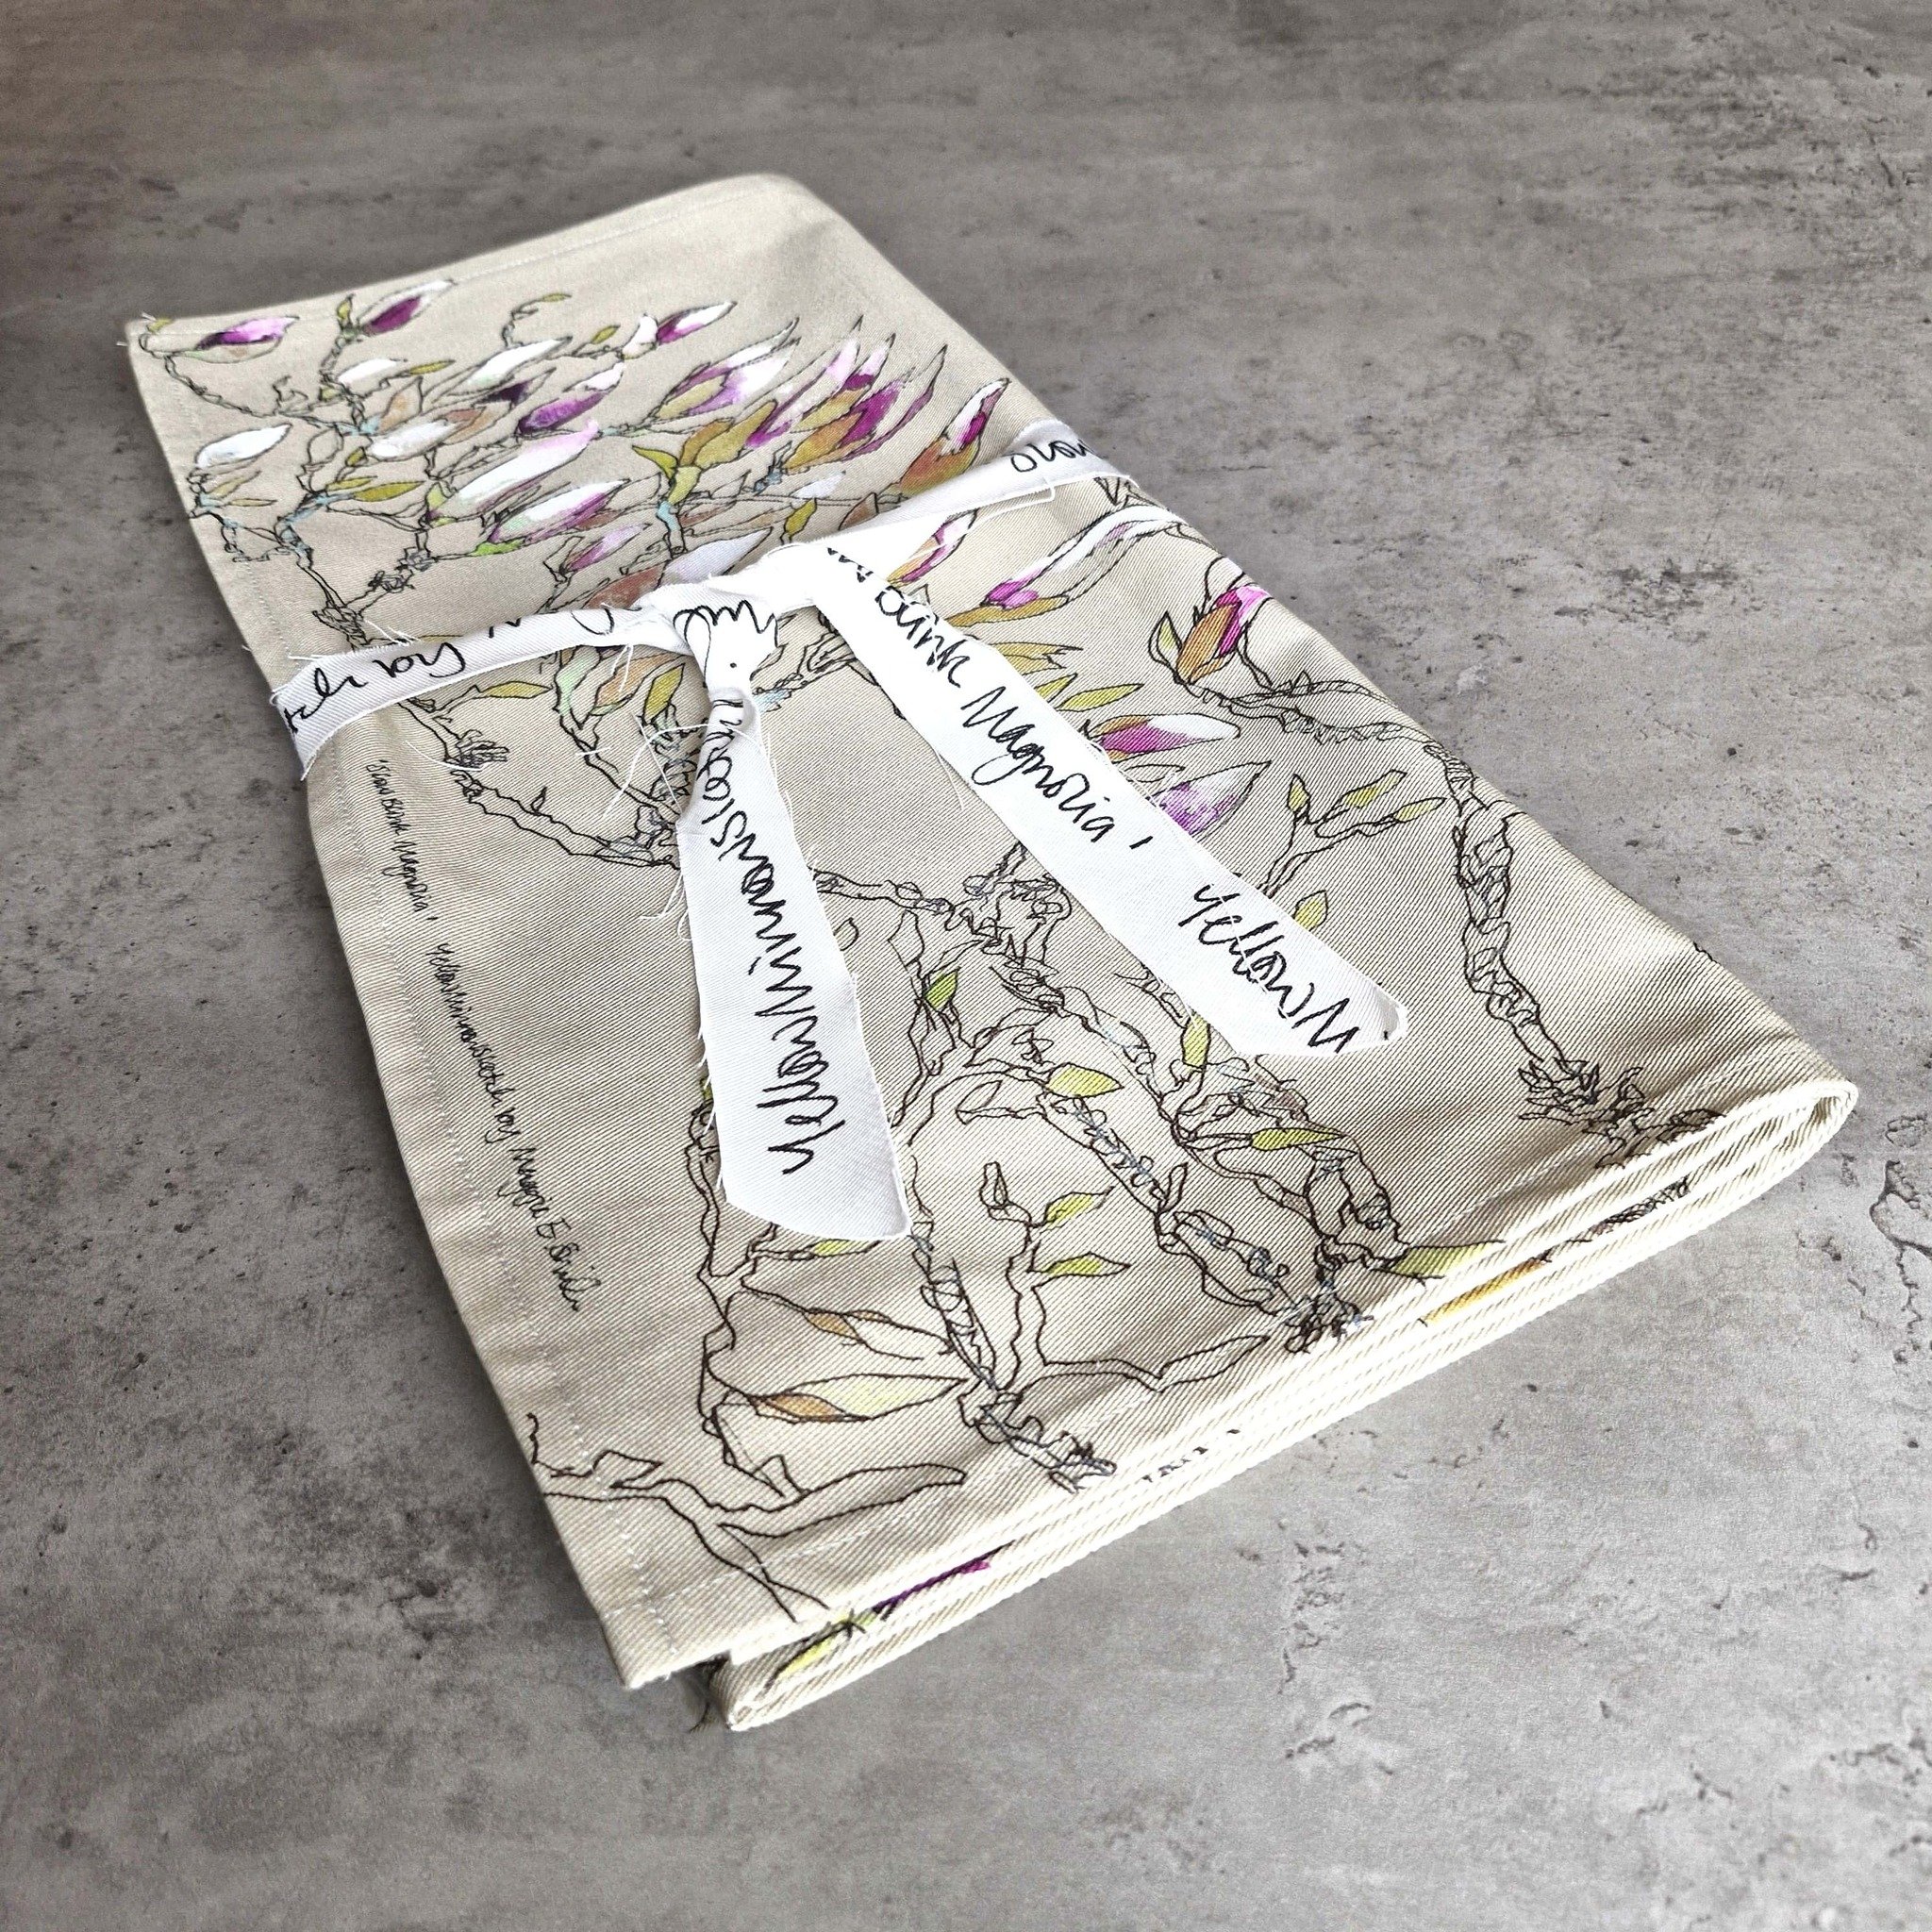 Magnolia Memory:
Artist and product feature:

Maggie Smith&rsquo;s beautifully vibrant drawing of the magnolia tree in her garden, available printed on a soft twill fabric. The 'Slow Blink' Magnolia table runner is developed from the original triptyc